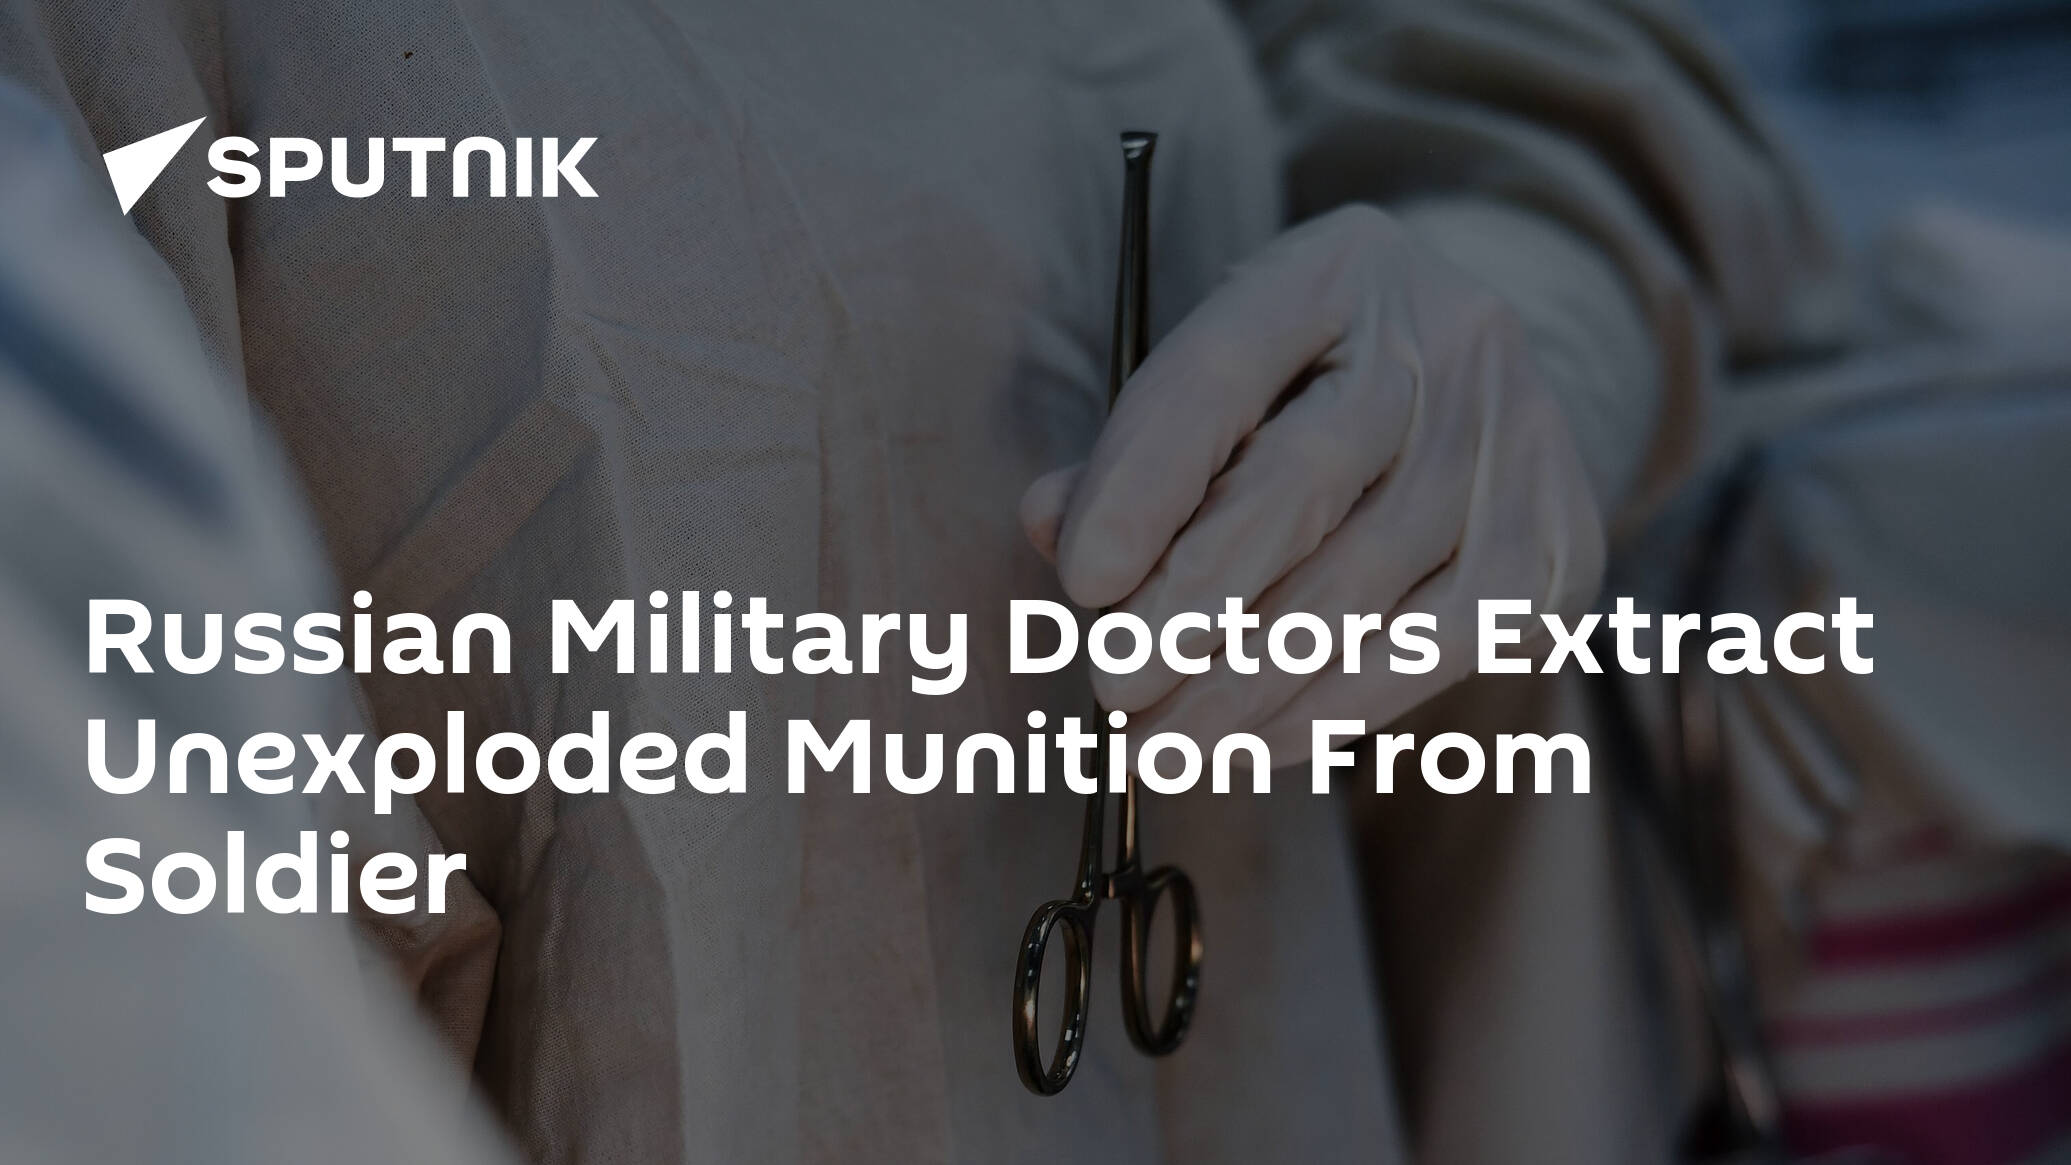 Russian Military Doctors Extract Unexploded Munition From Soldier